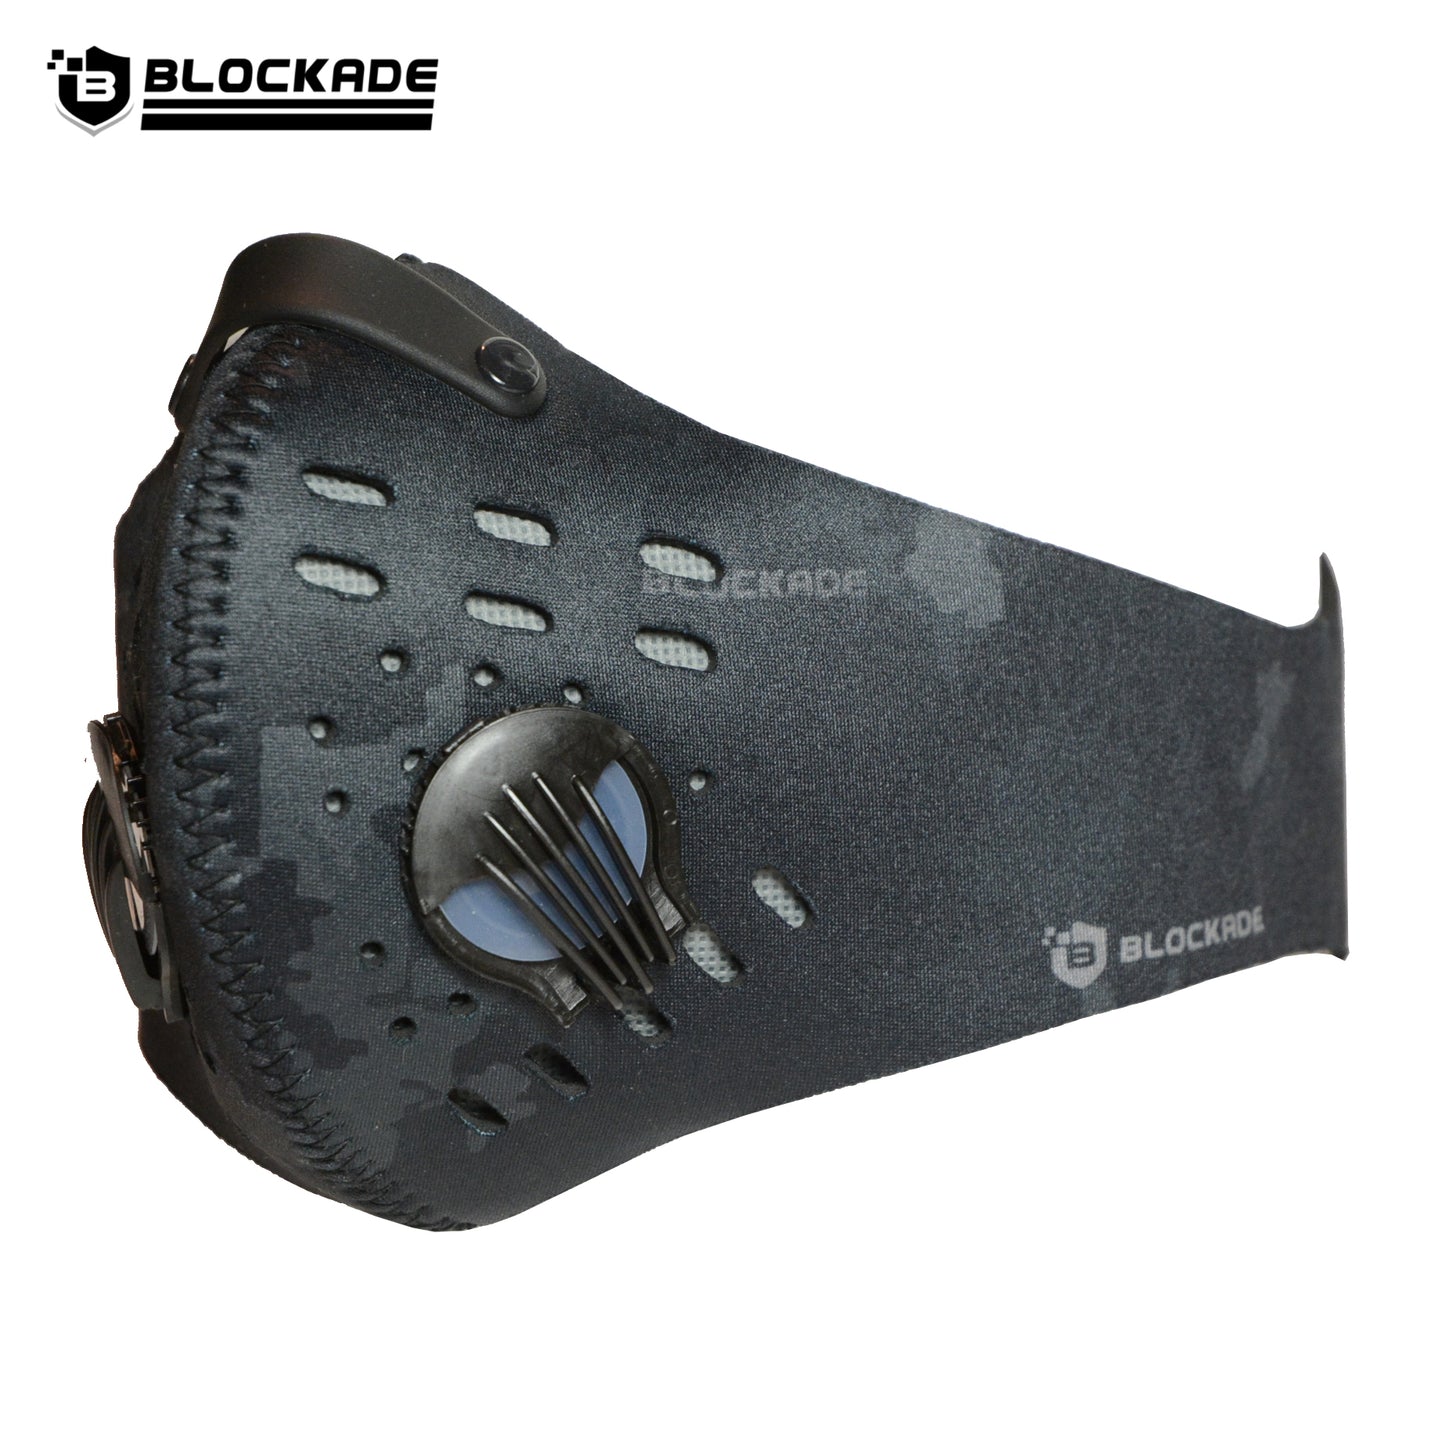 Blockade Face Masks Black Camo Night Ops with replaceable filter - Free Shipping - Free Pickup - In Stock Face Mask